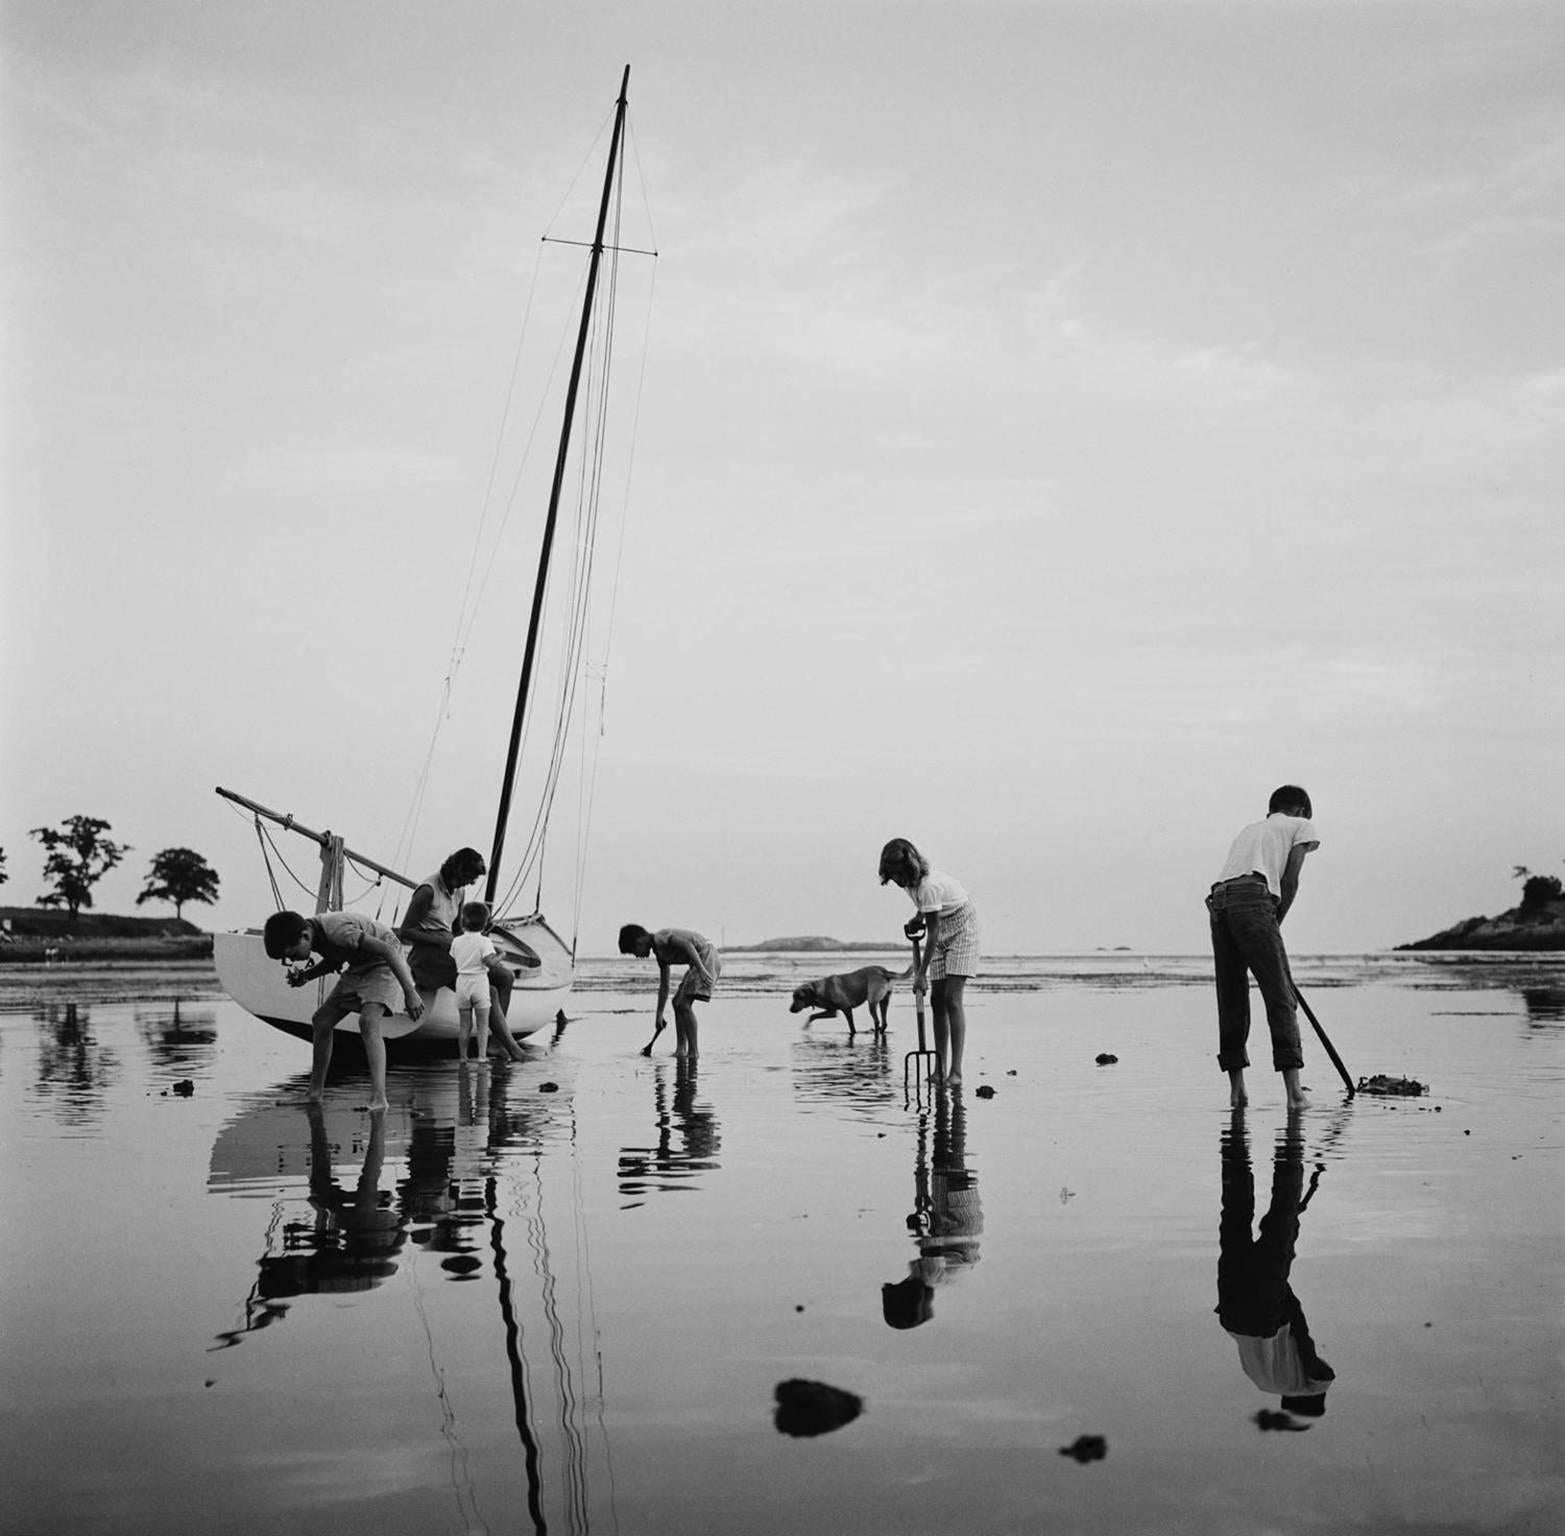 Slim Aarons
Digging for Clams on Black Beach (Slim Aarons Estate Edition), 1960 (printed later)
Chromogenic Lambda print

Mrs Hans Estin watches her children digging for clams at low tide on Black Beach, Massachusetts Bay, circa 1960

Estate stamped